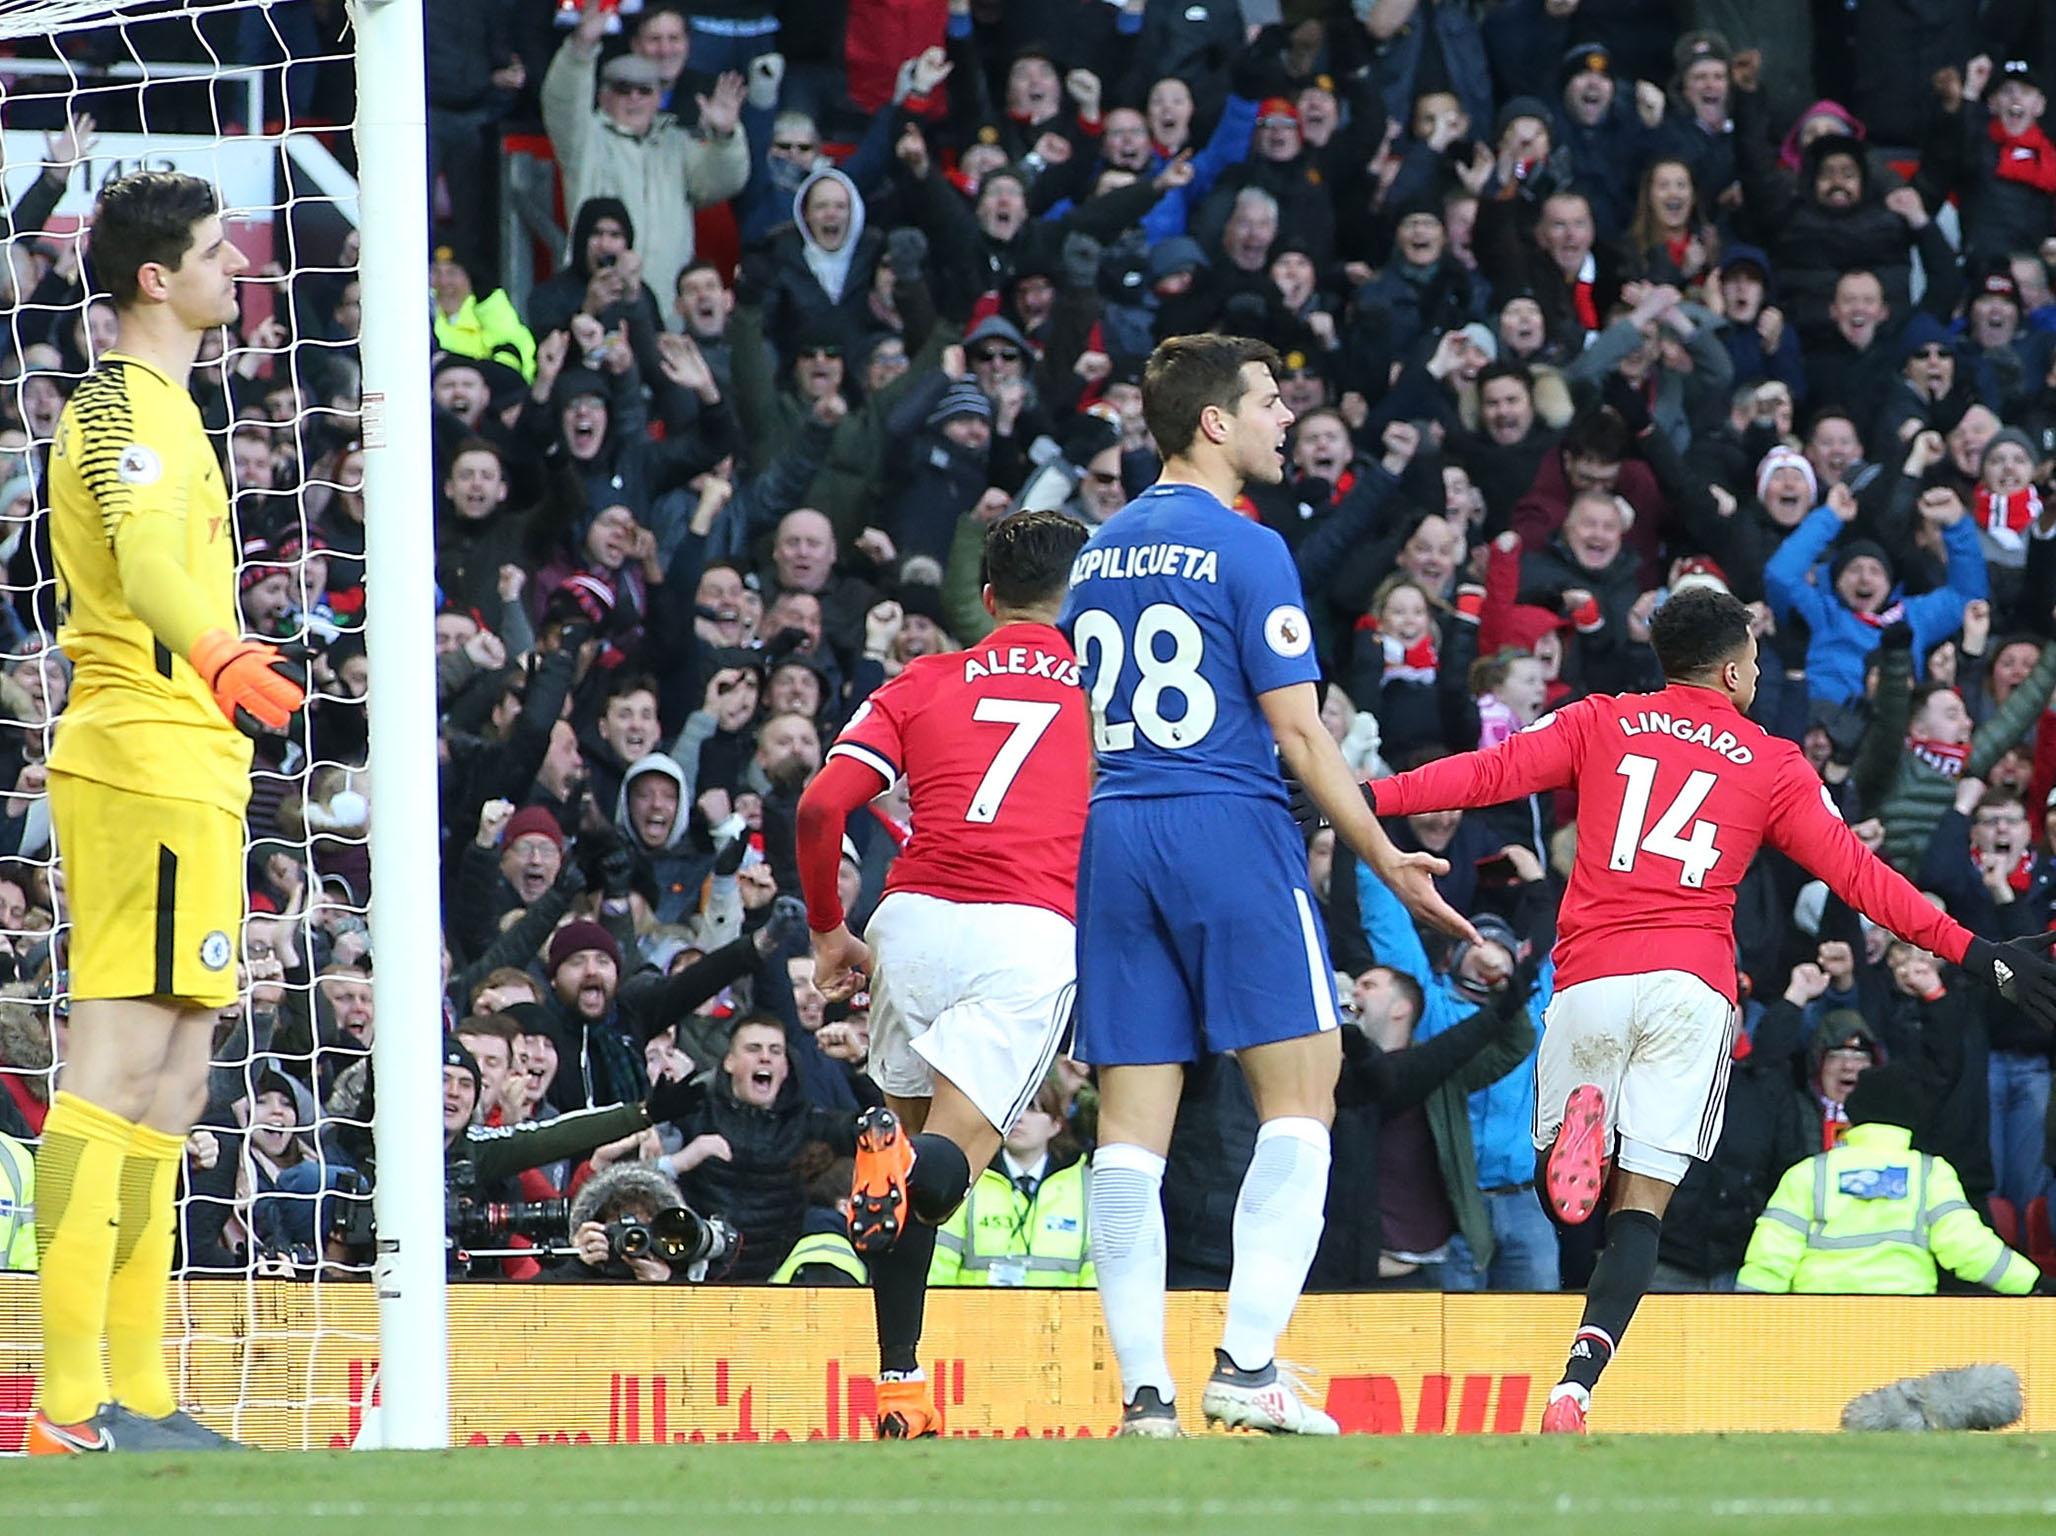 Jesse Lingard scored the winning goal as Manchester United saw off Chelsea